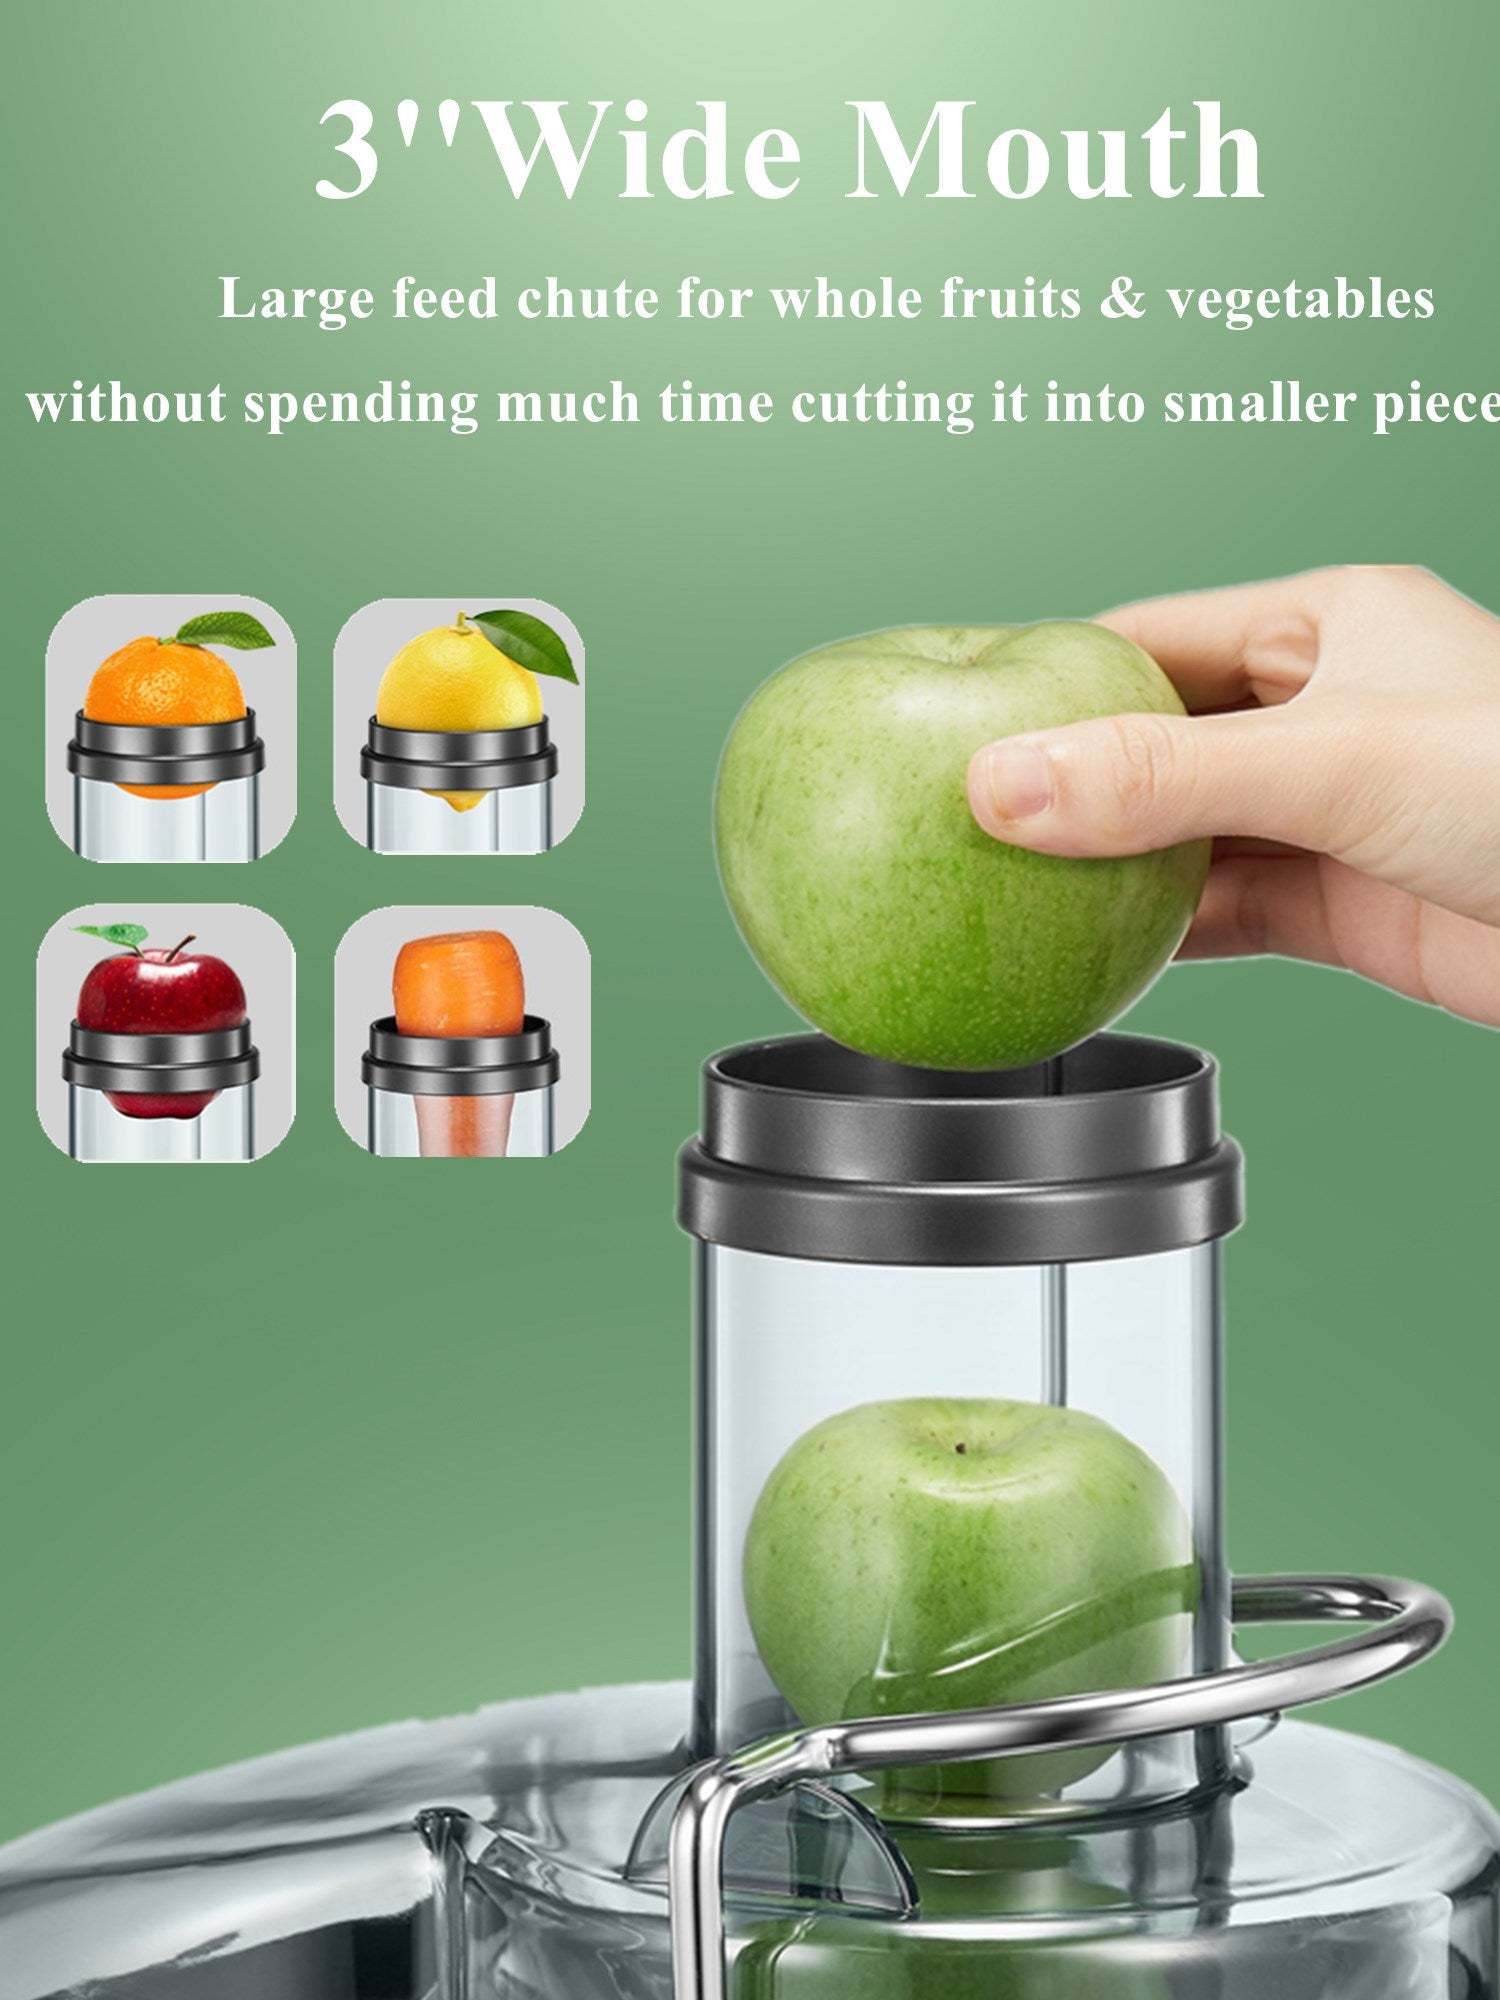 3'' wide mouth, large feed chute for whole fruits and vegetables